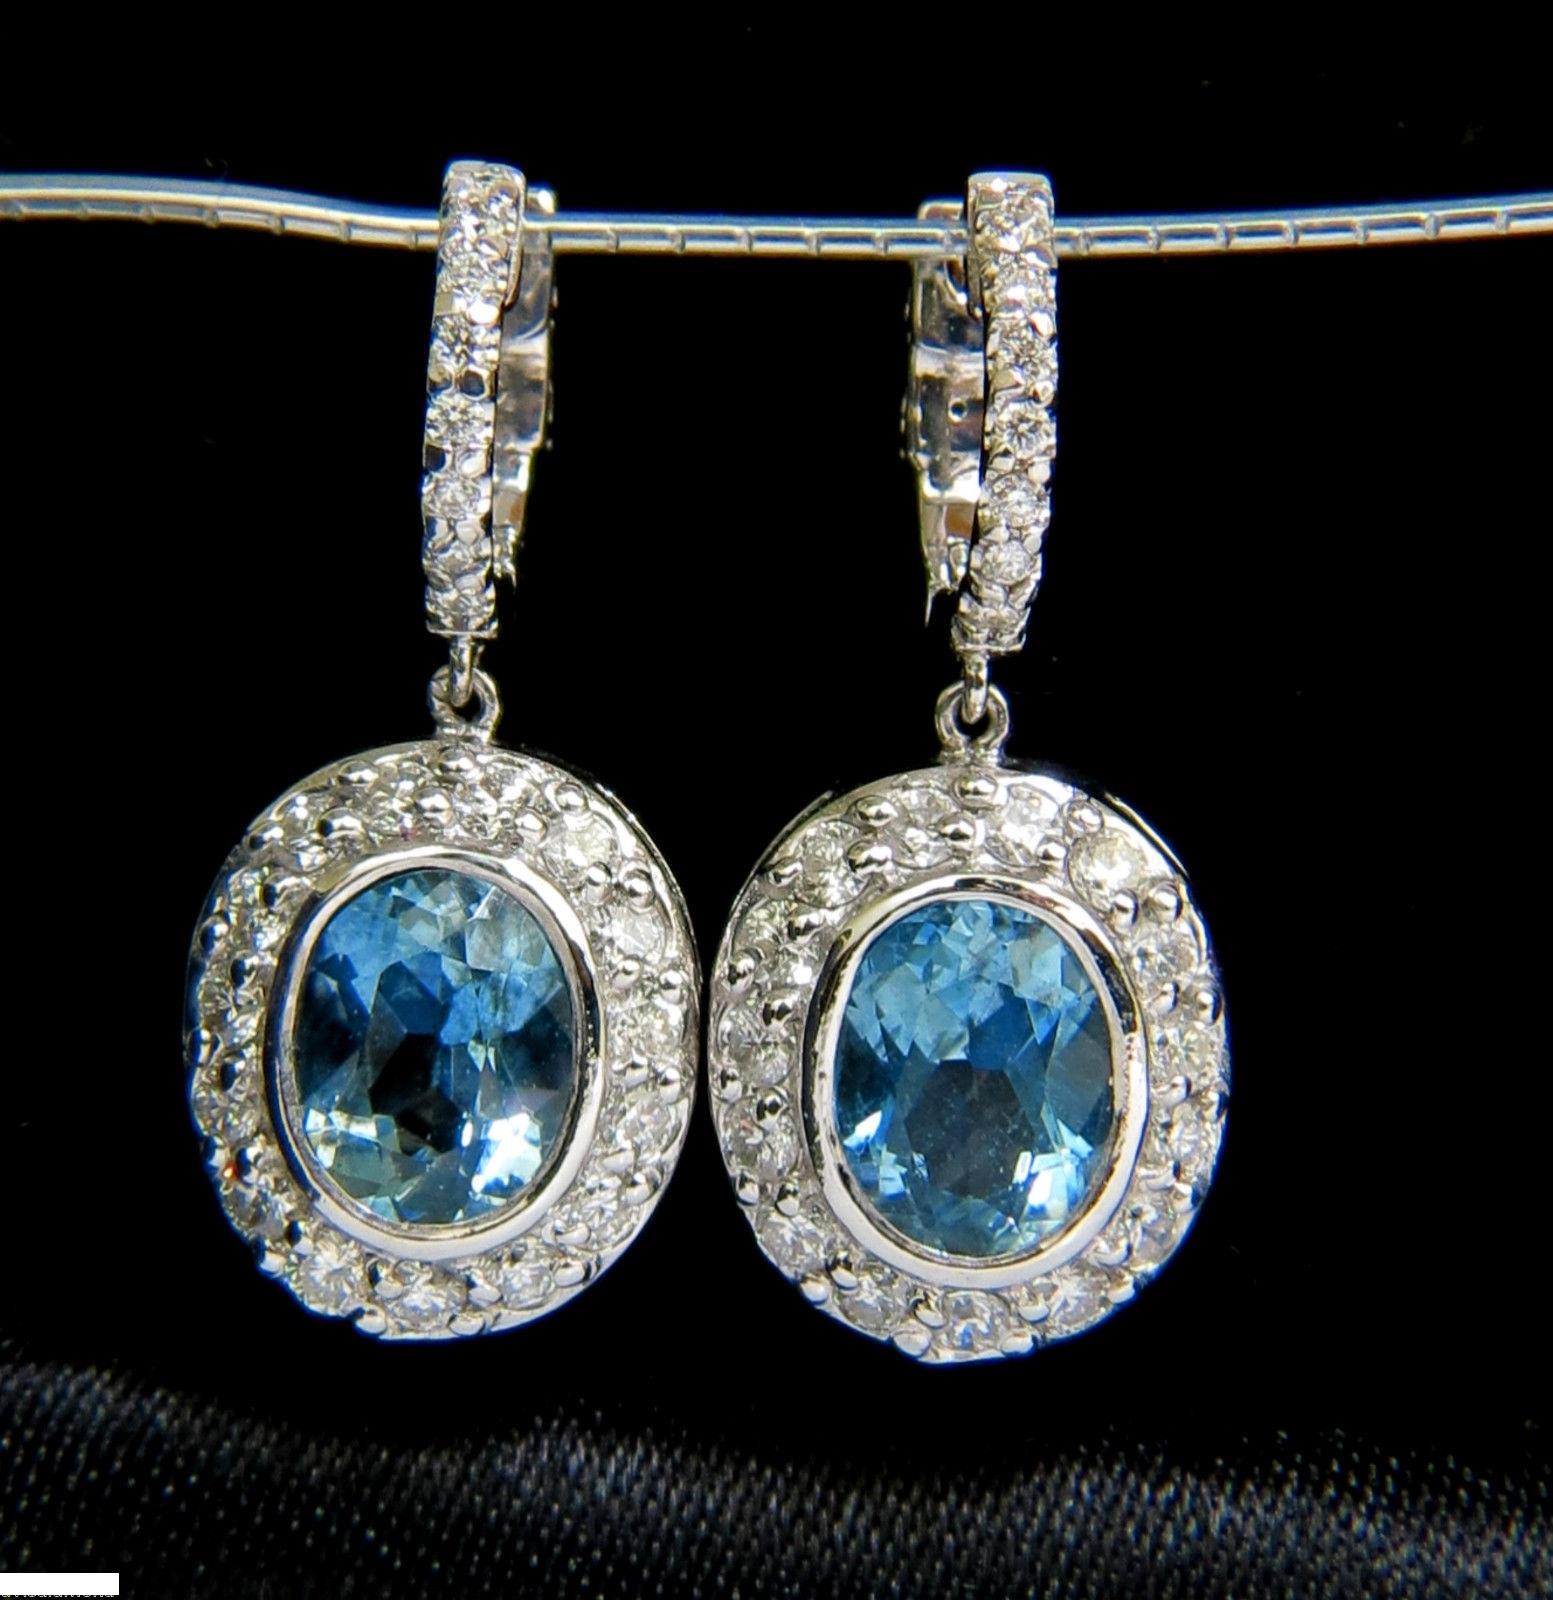 3.35ct. Natural Aquamarines

Gorgeous Aqua Color / sparkles

Clean Clarity and Excellent transparency 

8.0mm X 6.2mm



1.20ct. diamonds

G-color, Vs-2 clarity

14kt. white gold

8.8 grams

Cluster portion of earrings:

15.30 X 13.20mm

Entire